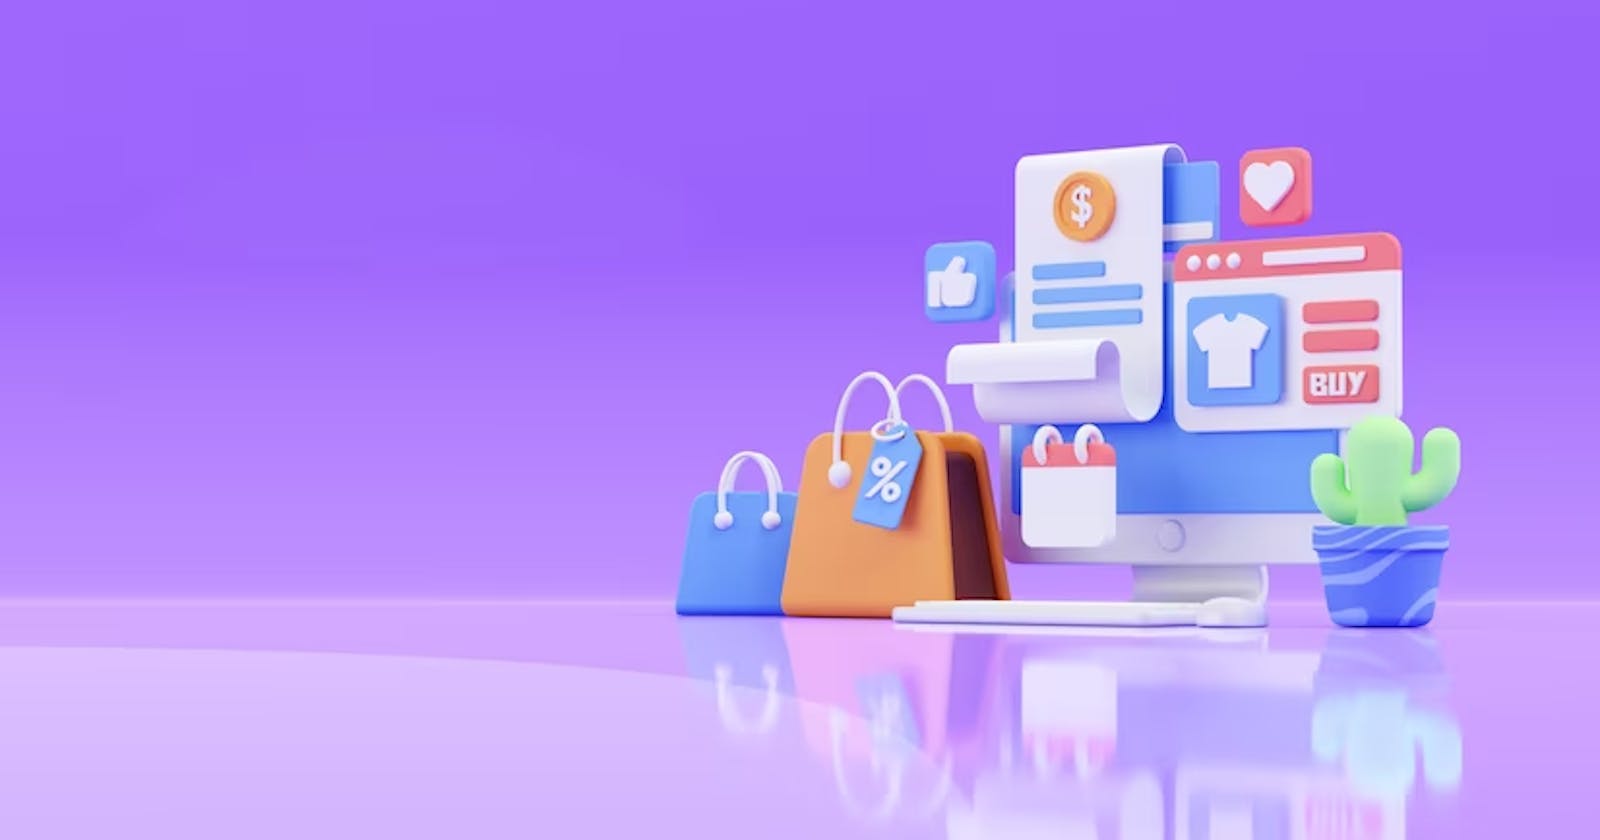 Choosing the Best 3D eCommerce Platform for Your Business